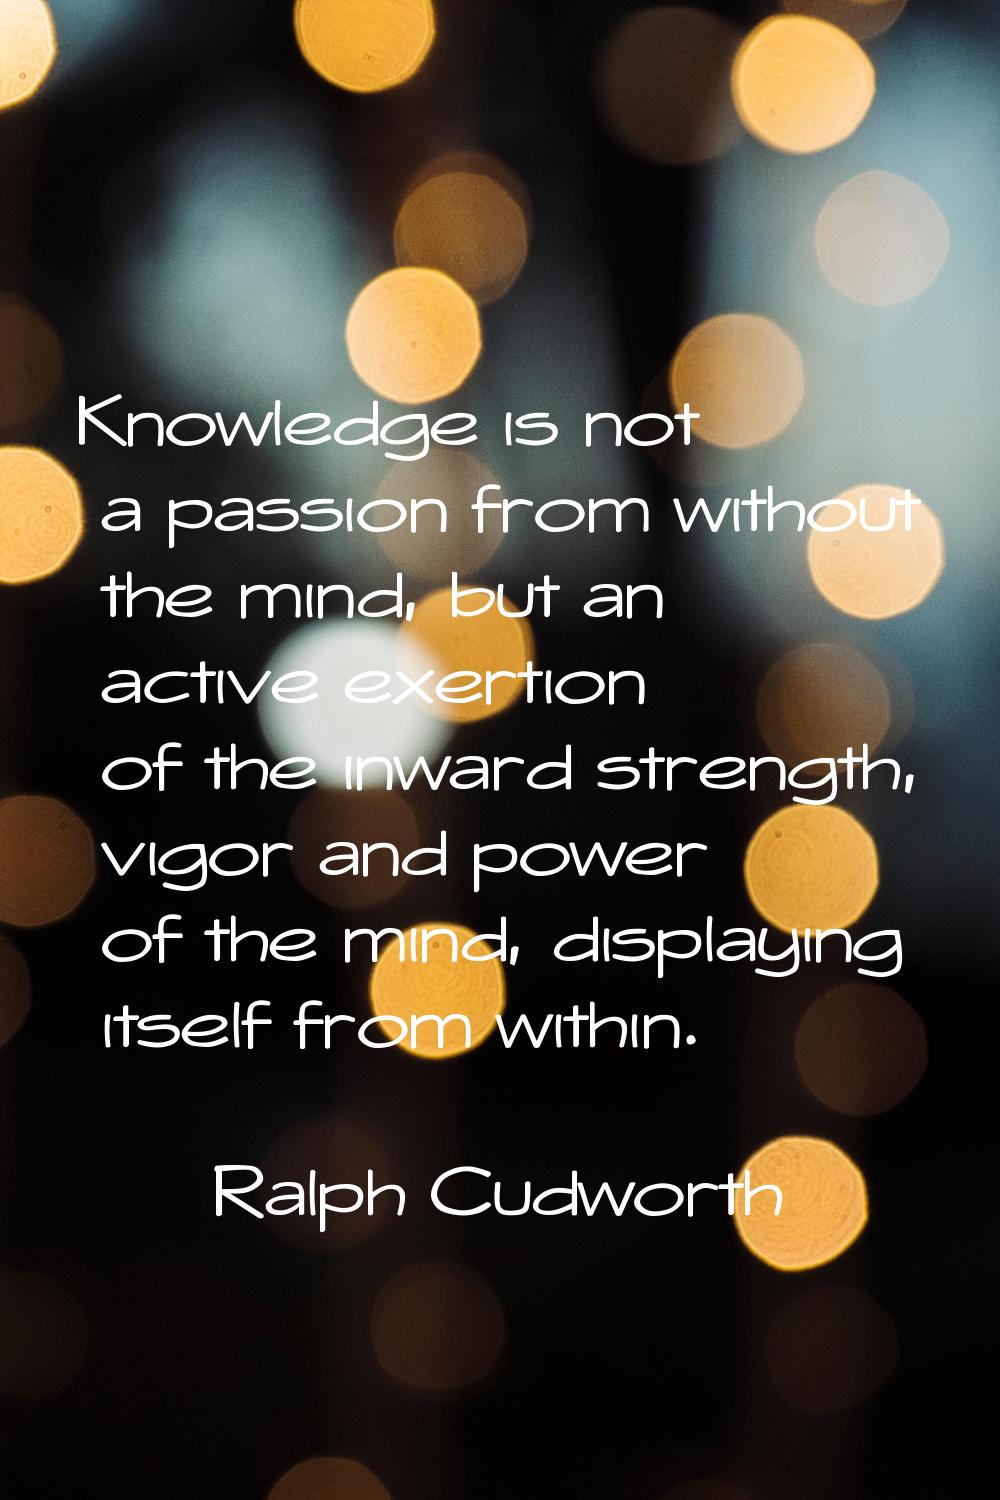 Knowledge is not a passion from without the mind, but an active exertion of the inward strength, vi